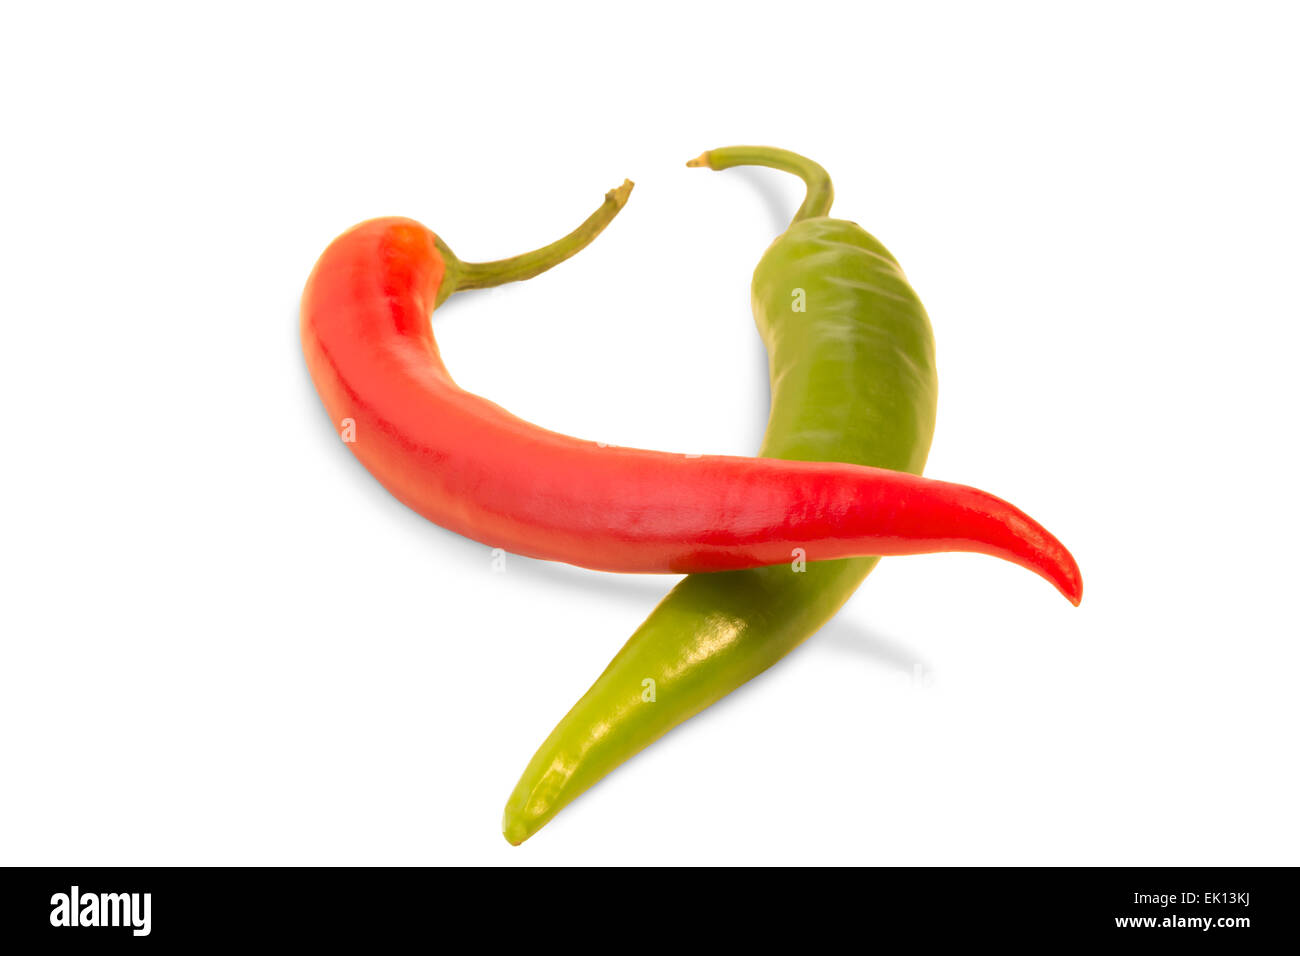 A whole red chili on top of a whole green chili (Capsicum annuum) isolated on white background Stock Photo